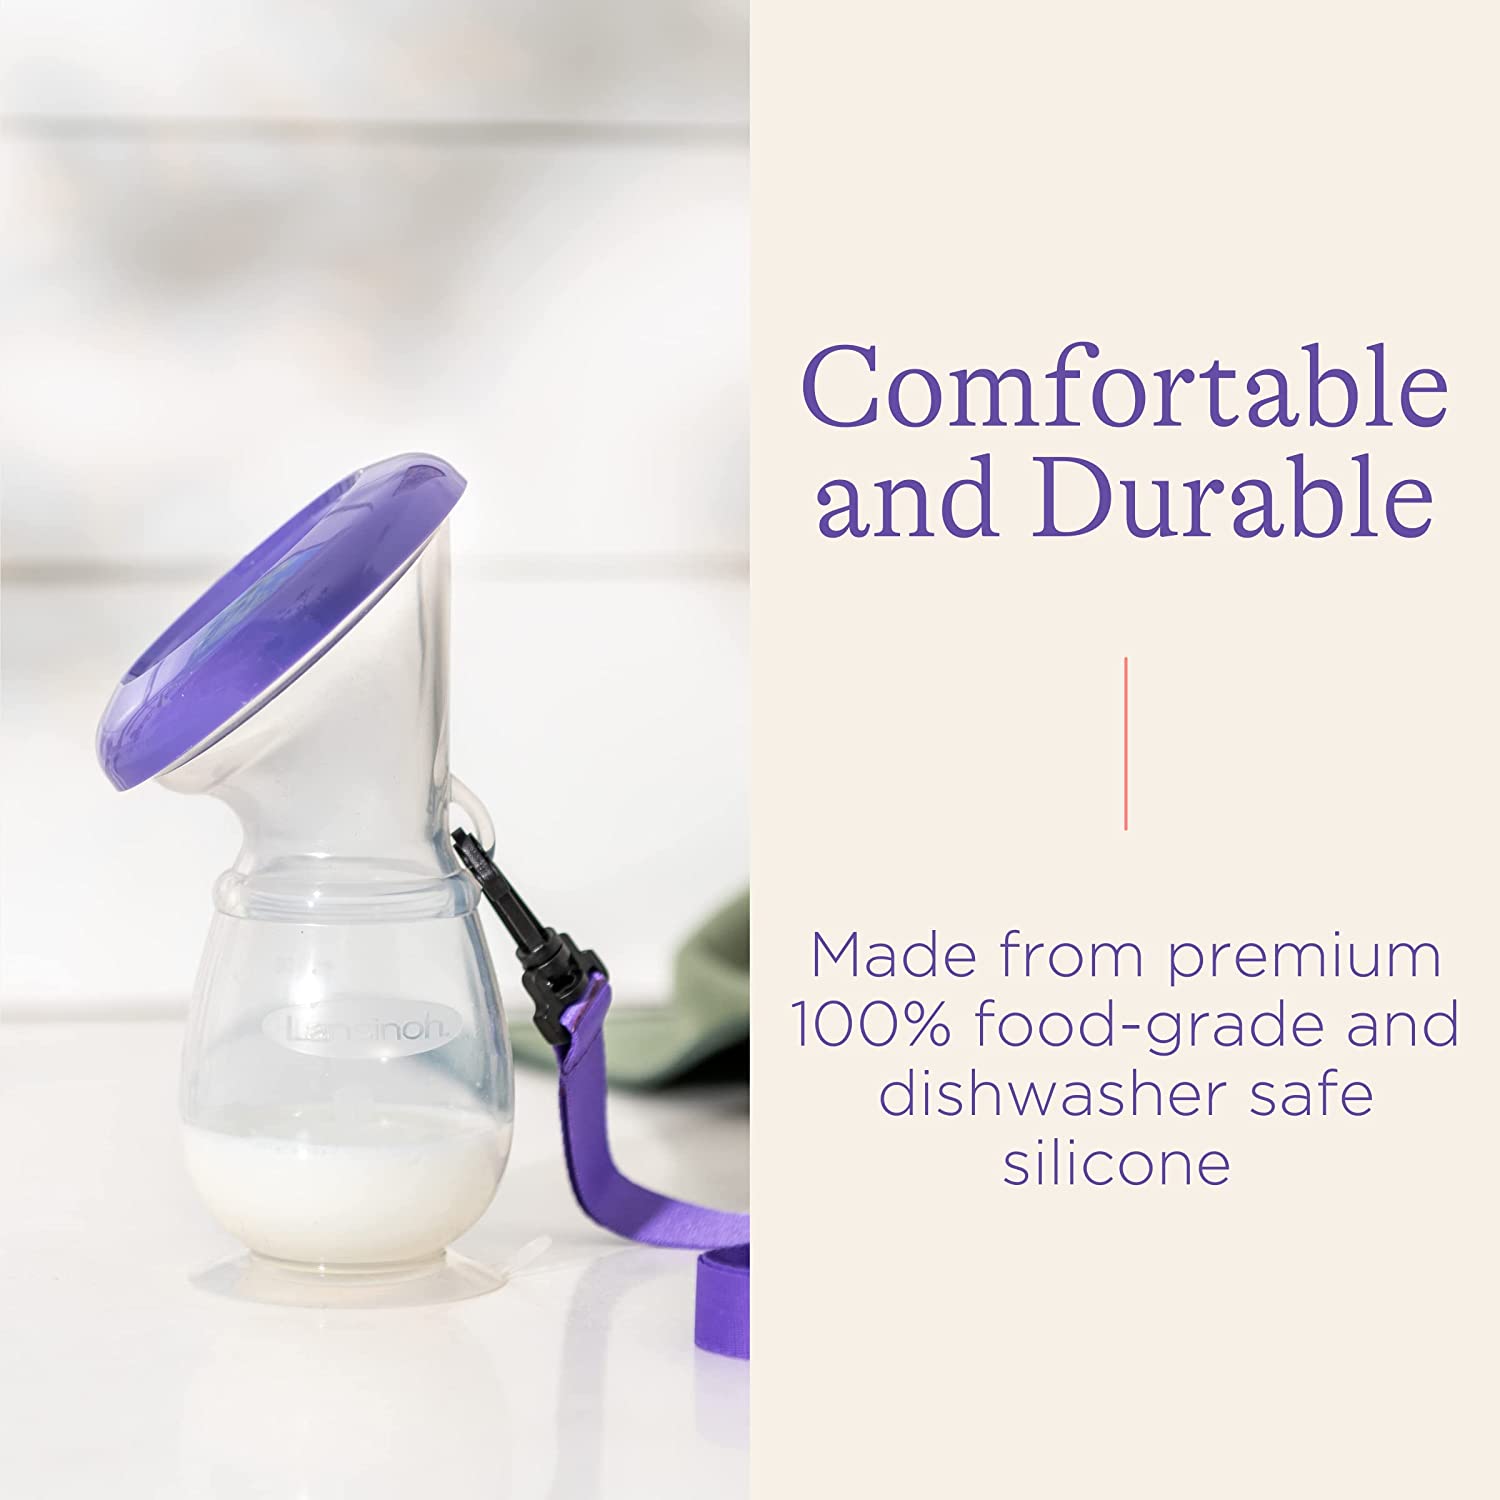 Lansinoh Silicone Breast Pump for Breastfeeding with Suction Base, Portable and Lightweight, Includes Neck Strap and Protective Lid.